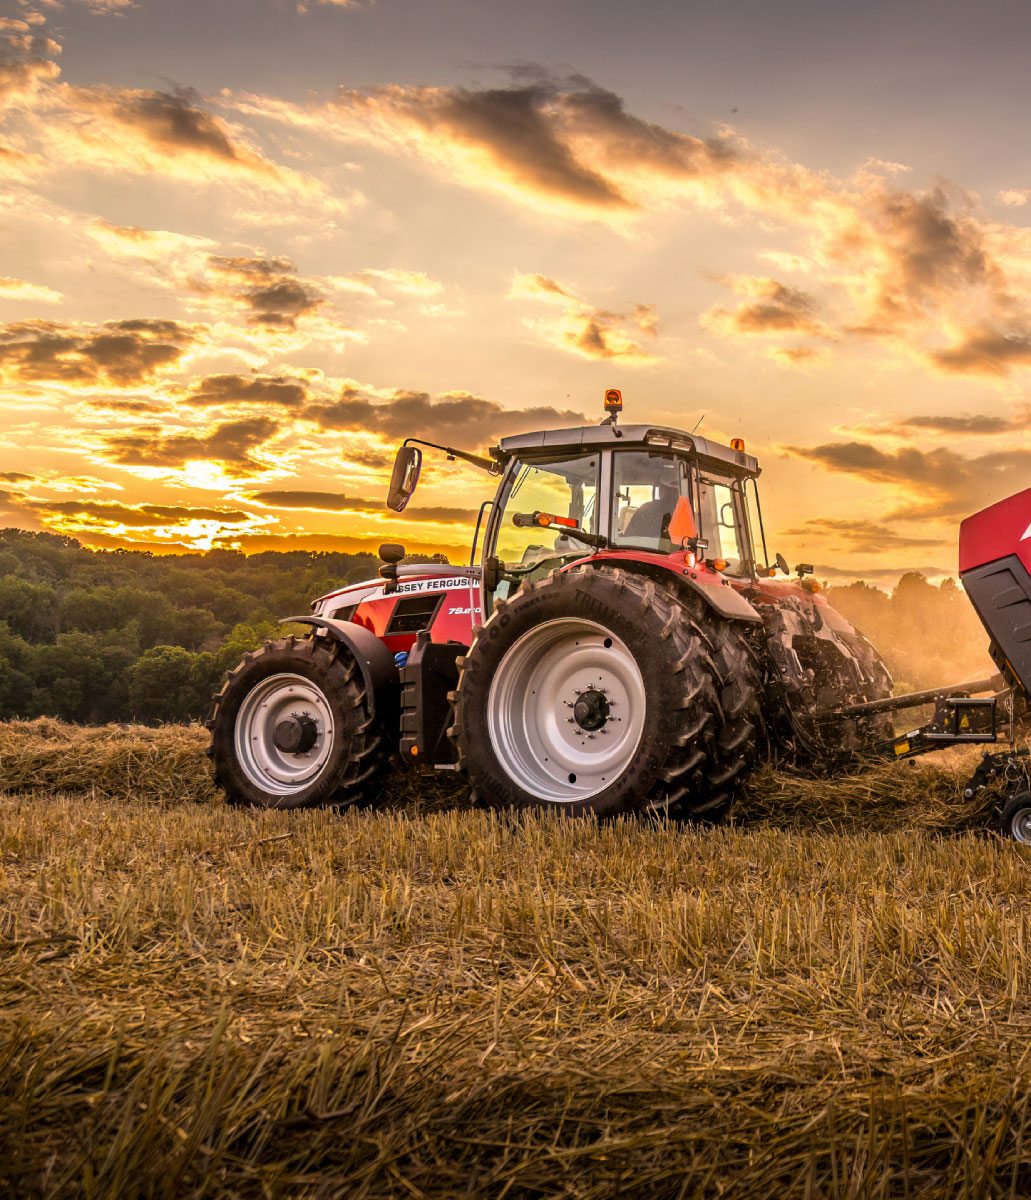 Excellence in Agricultural Machinery for 175 Years